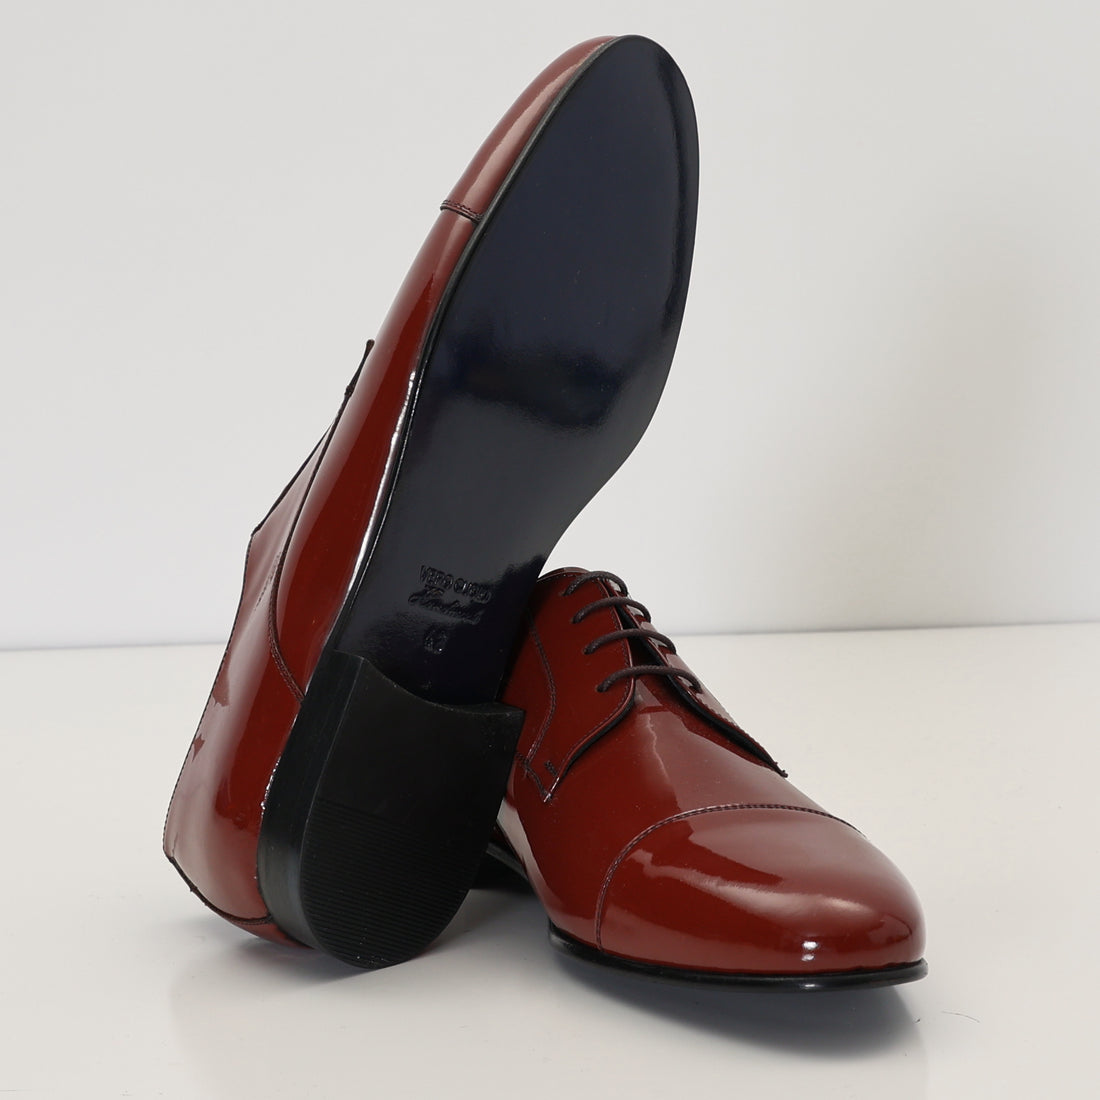 N° D5590 PATENT LEATHER SHOES - Rust